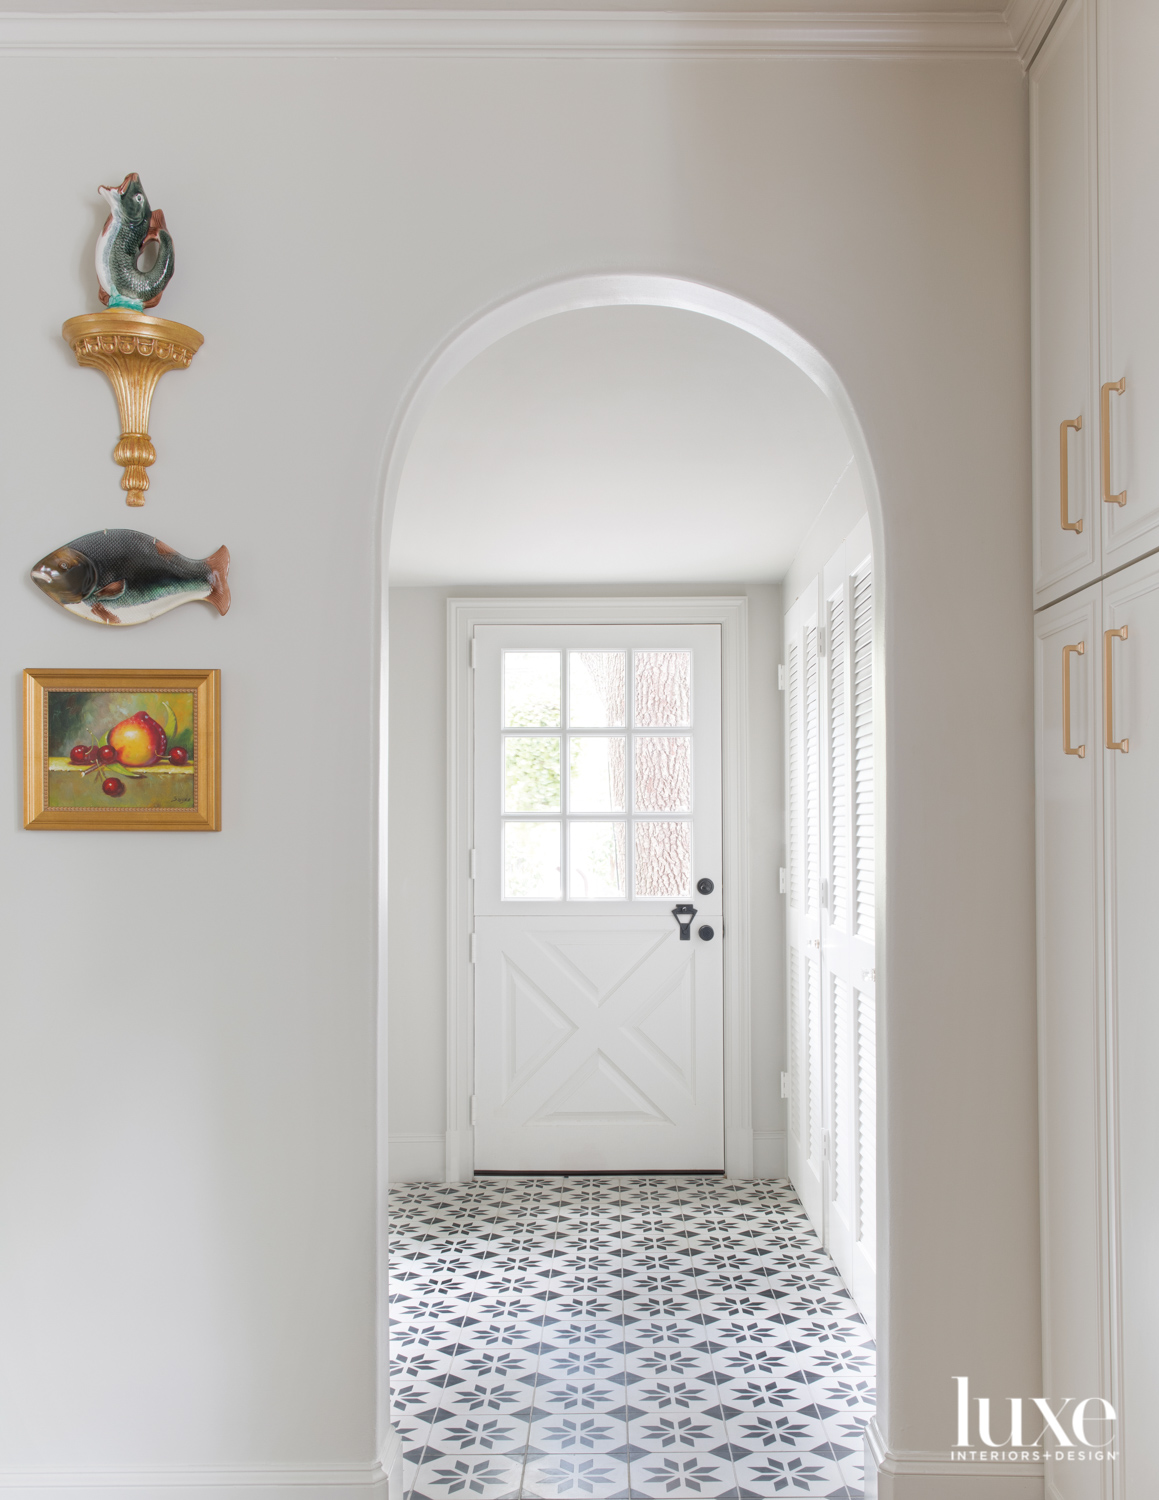 Entry with black and white flooring